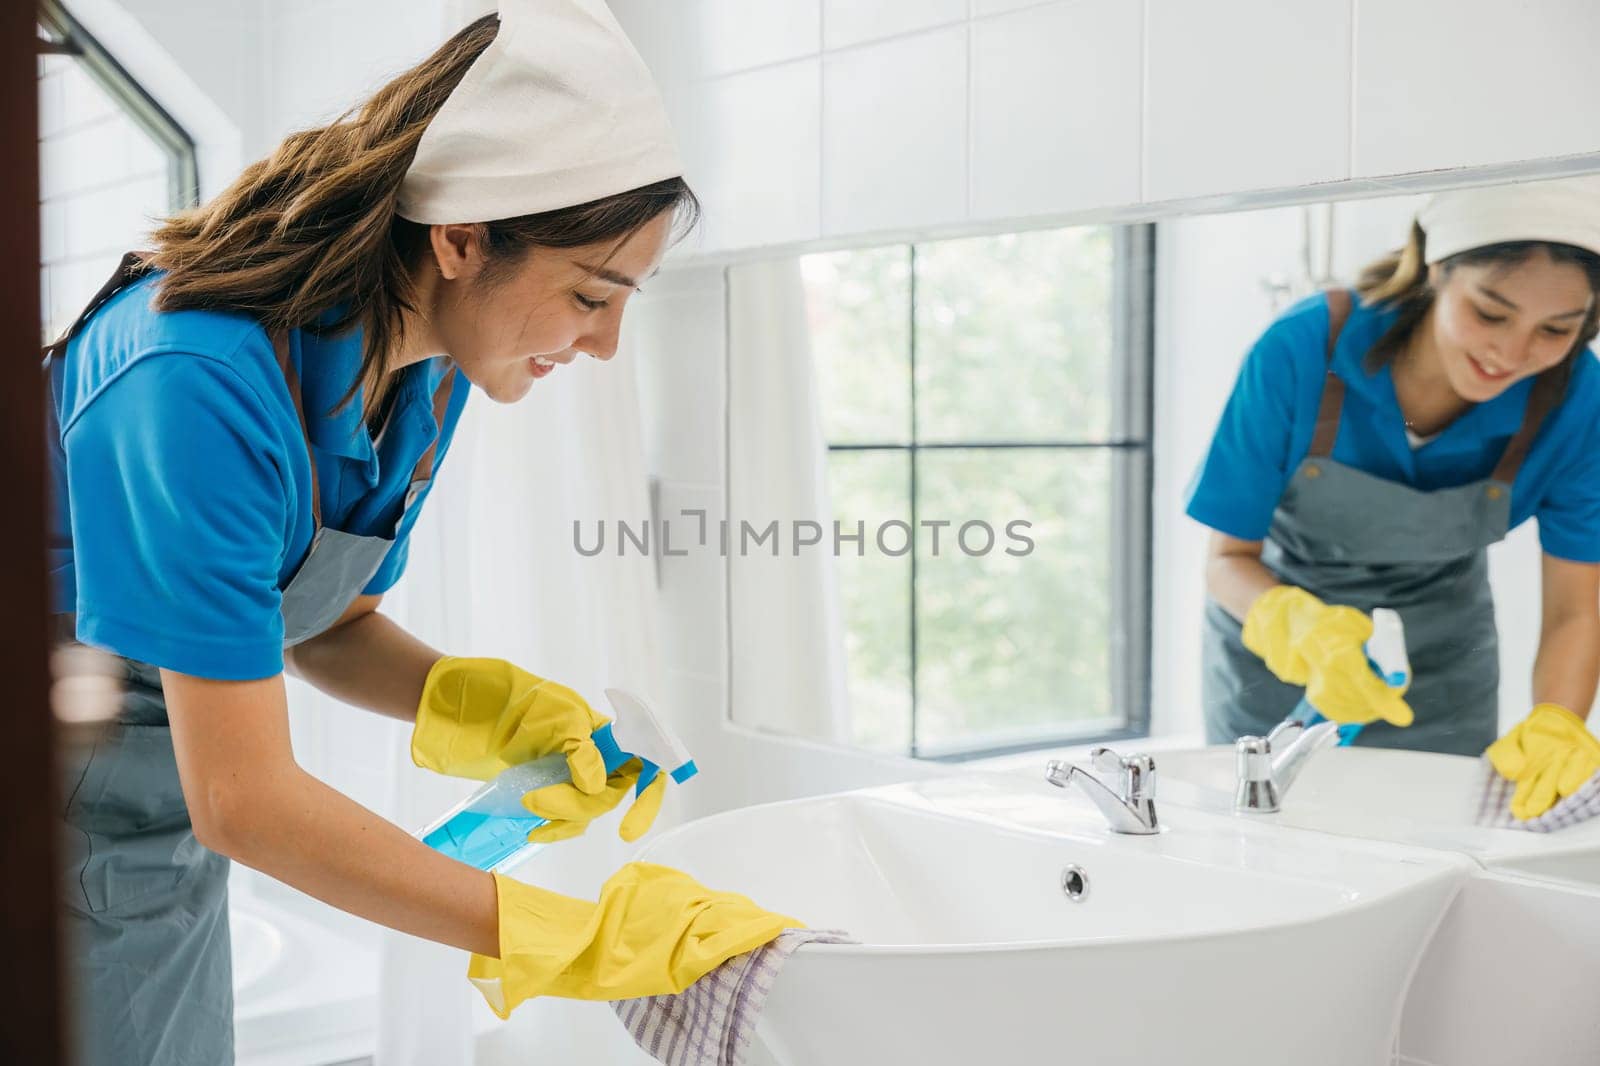 Focused on chores a woman in uniform cleans bathroom sink and faucet with spray. Her dedication to housework ensures purity hygiene and shiny fixtures. spray cleaner